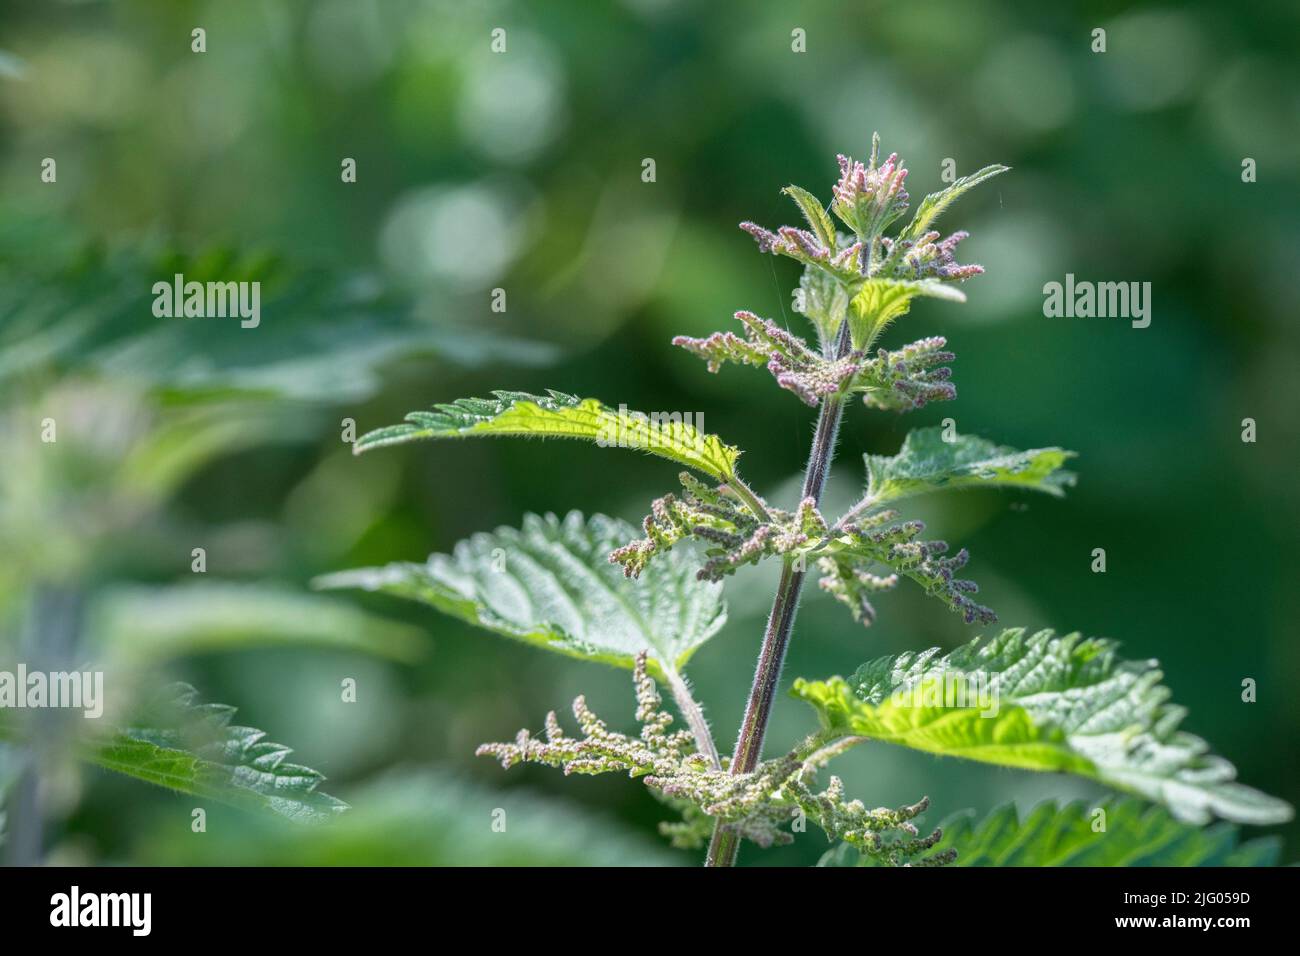 Sunlit nettle leaves of Urtica dioica / Common Stinging Nettle by morning sunlight in UK hedgerow. For painful, foraged wild foods, medicinal plants. Stock Photo